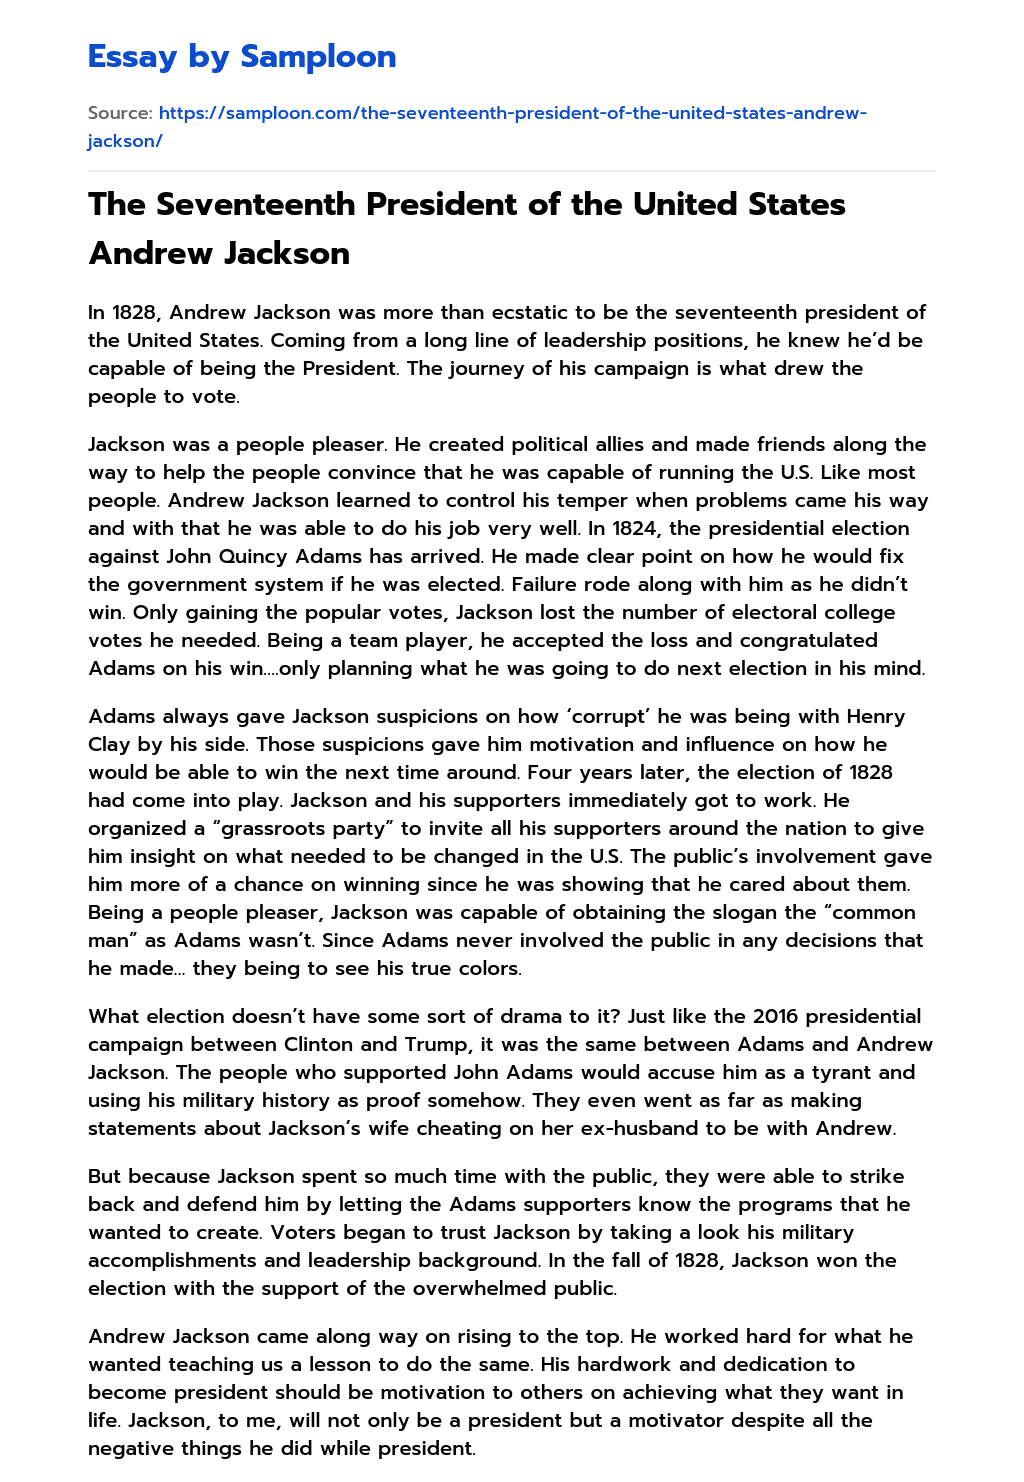 The Seventeenth President of the United States Andrew Jackson essay